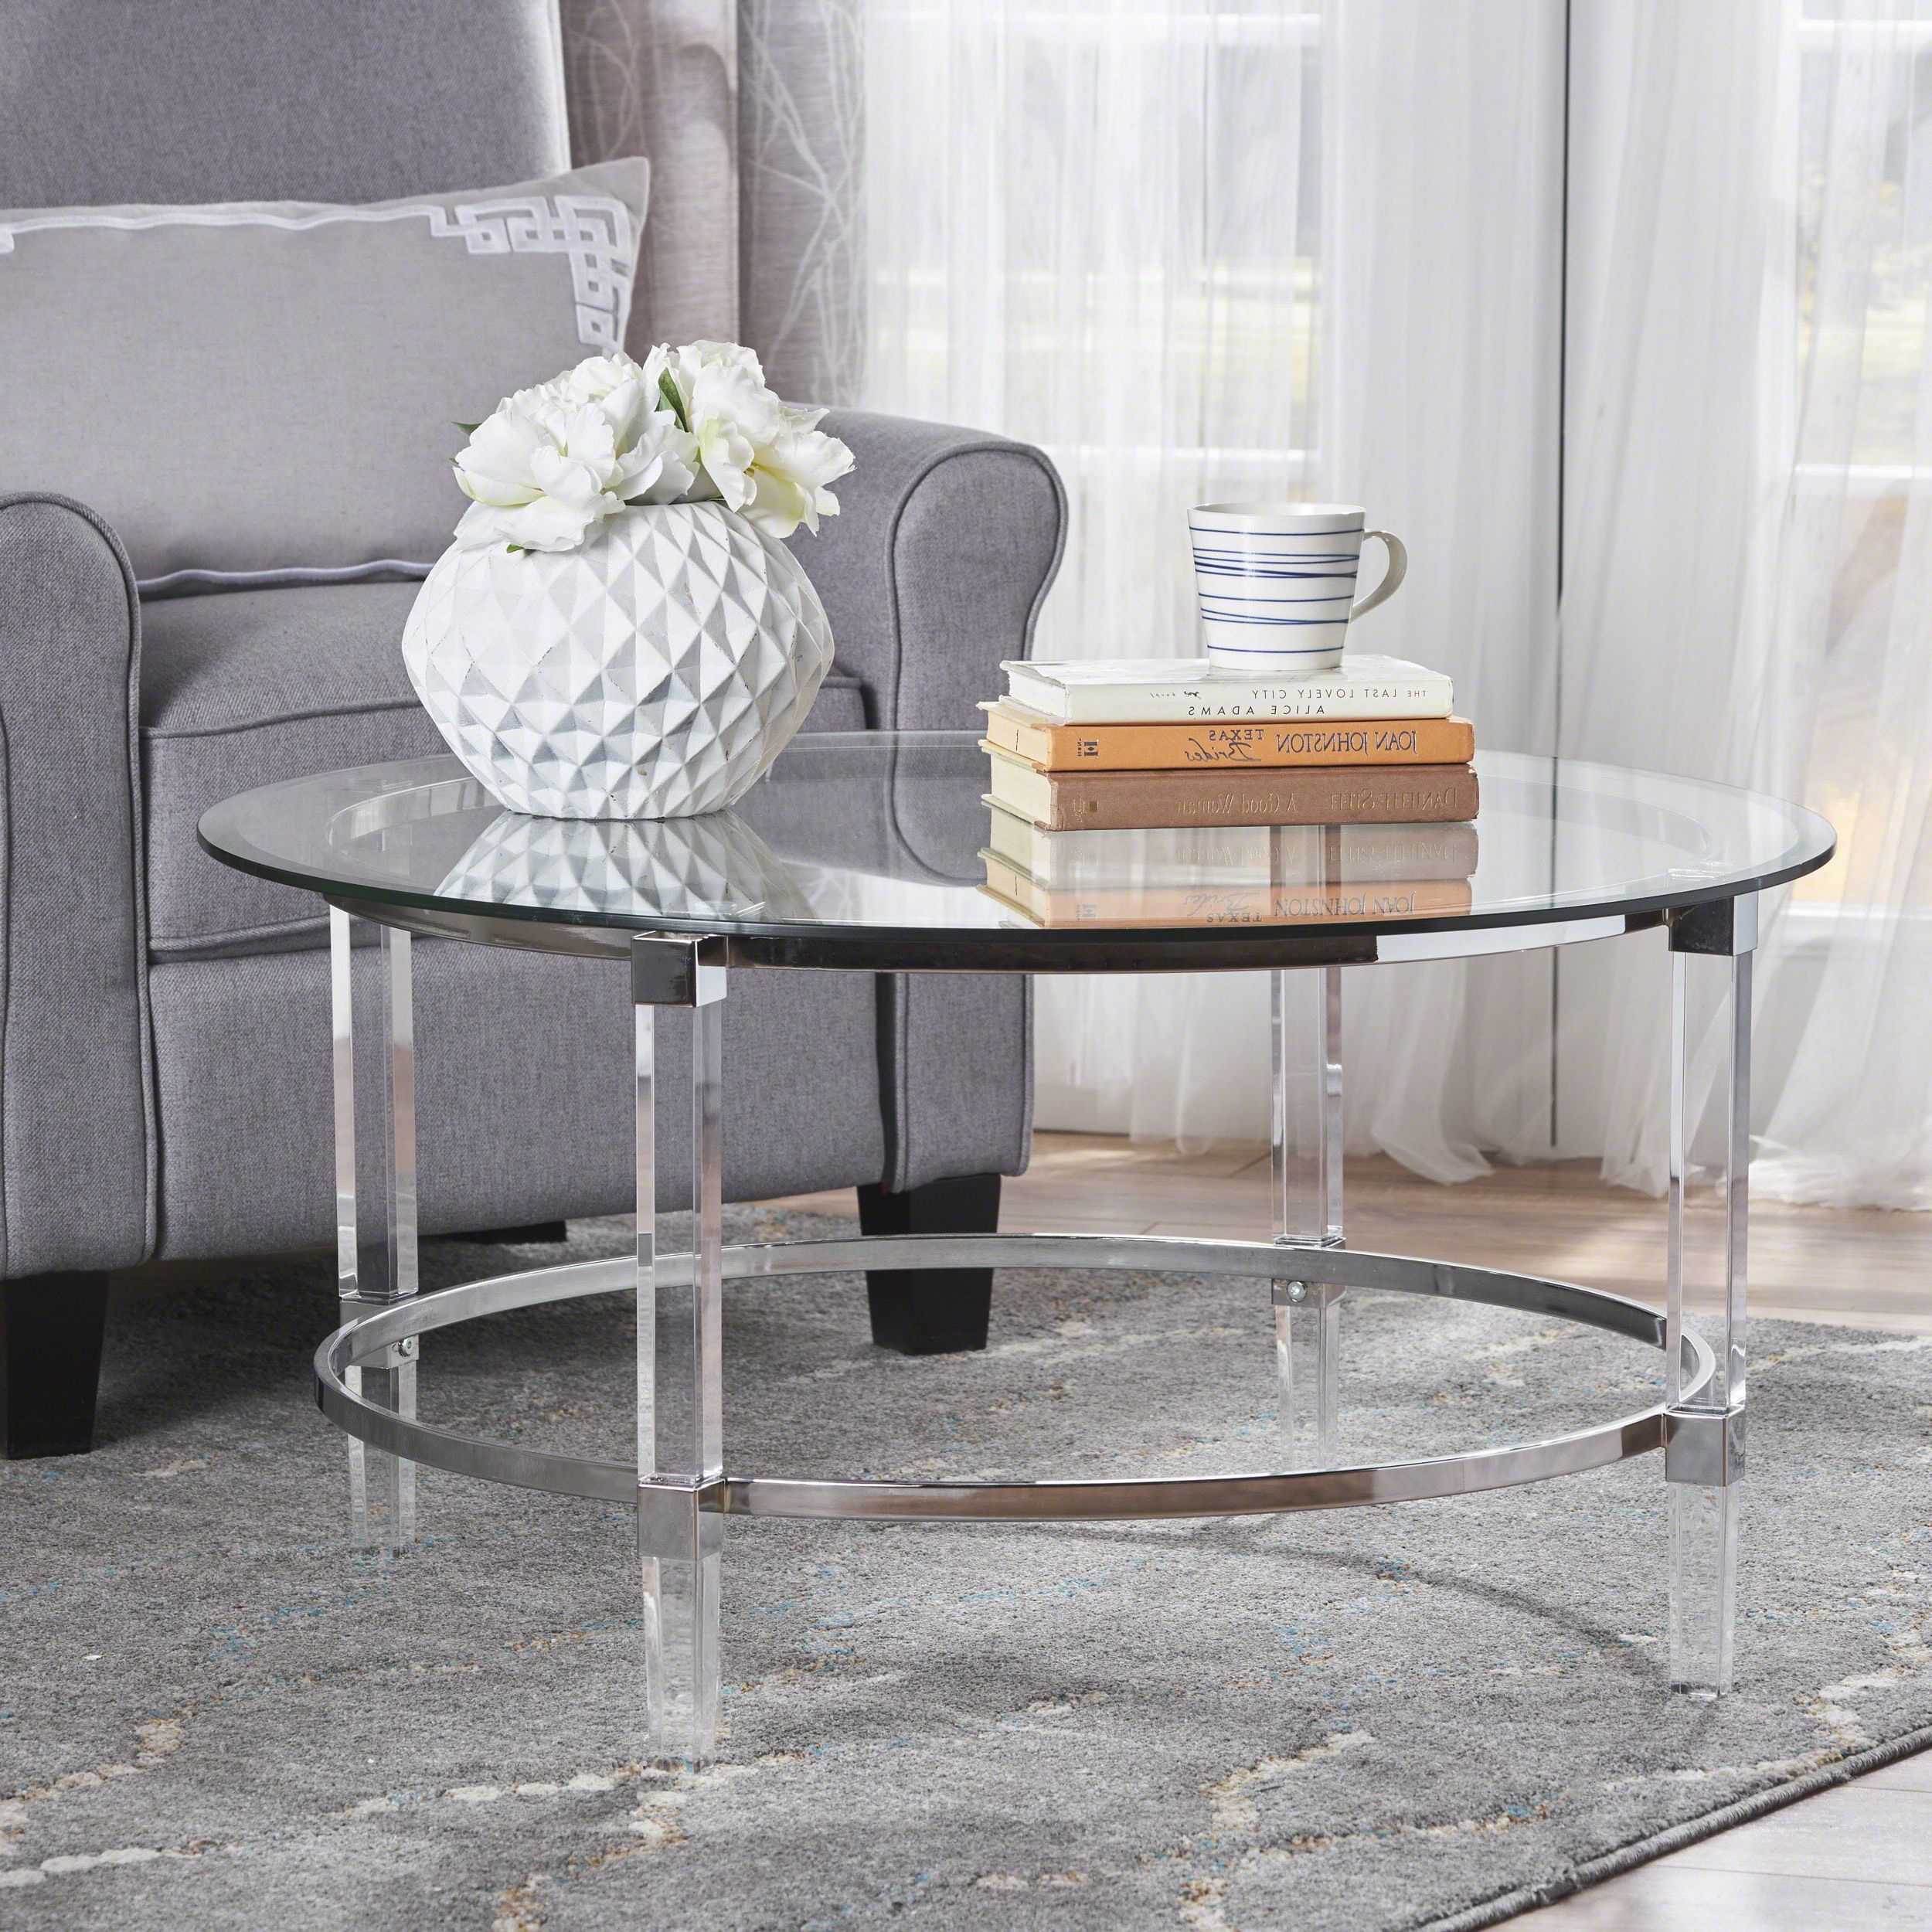 2019 Tempered Glass Coffee Tables Pertaining To Lynn Contemporary Round Tempered Glass Coffee Table With Acrylic And (View 14 of 15)